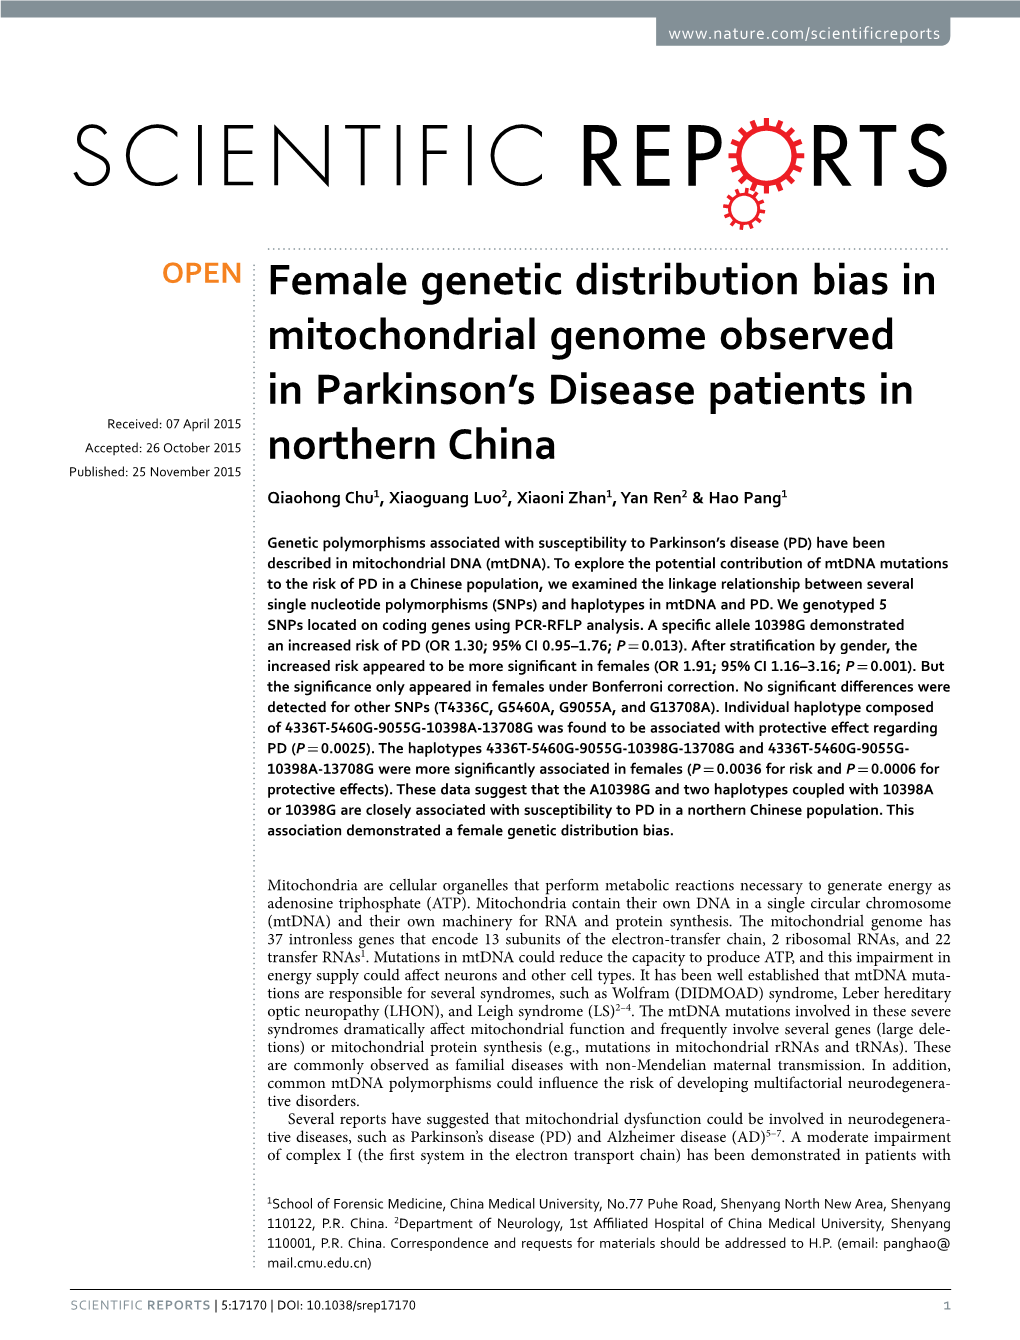 Female Genetic Distribution Bias in Mitochondrial Genome Observed In